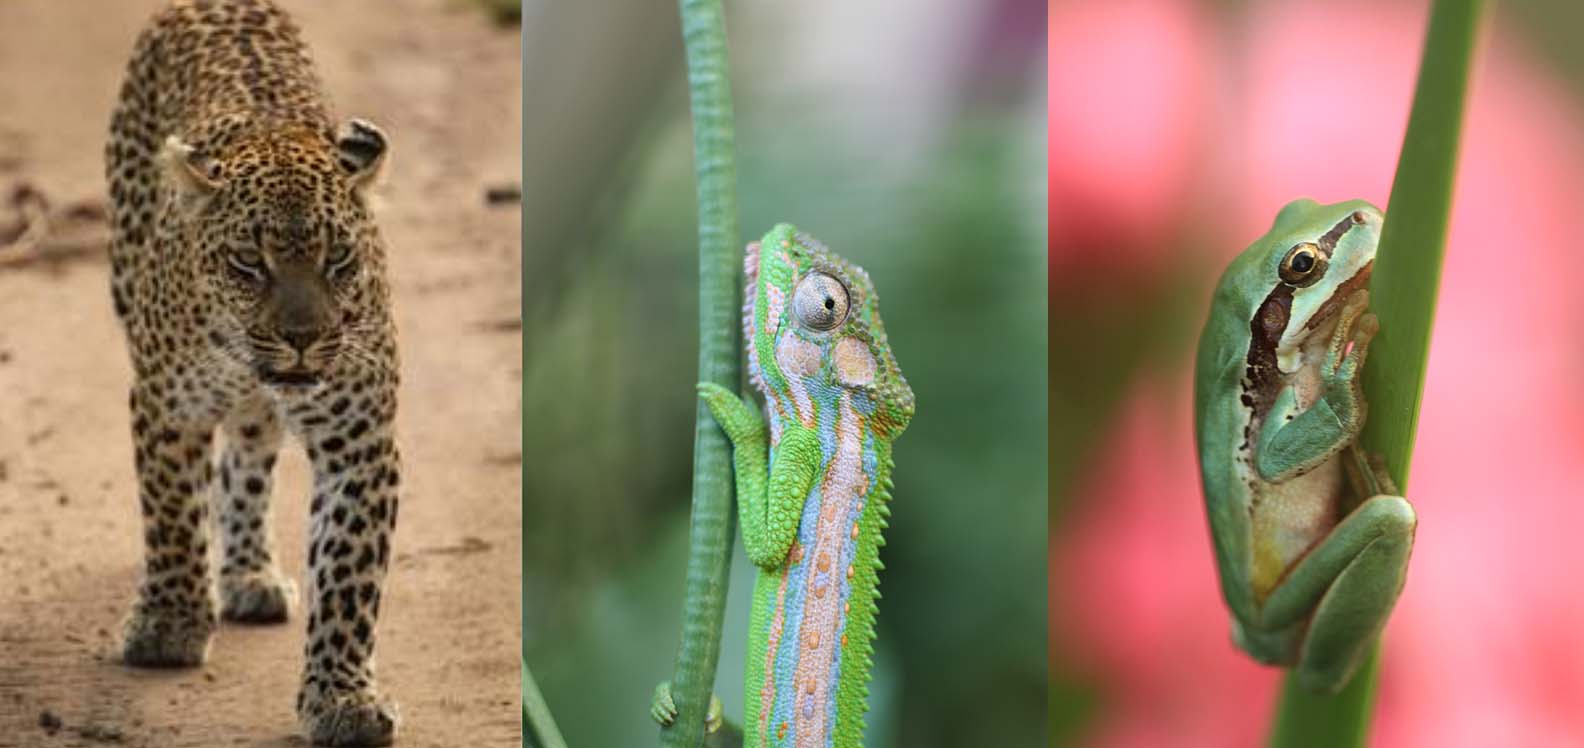 A leopard, chameleon and tree frog